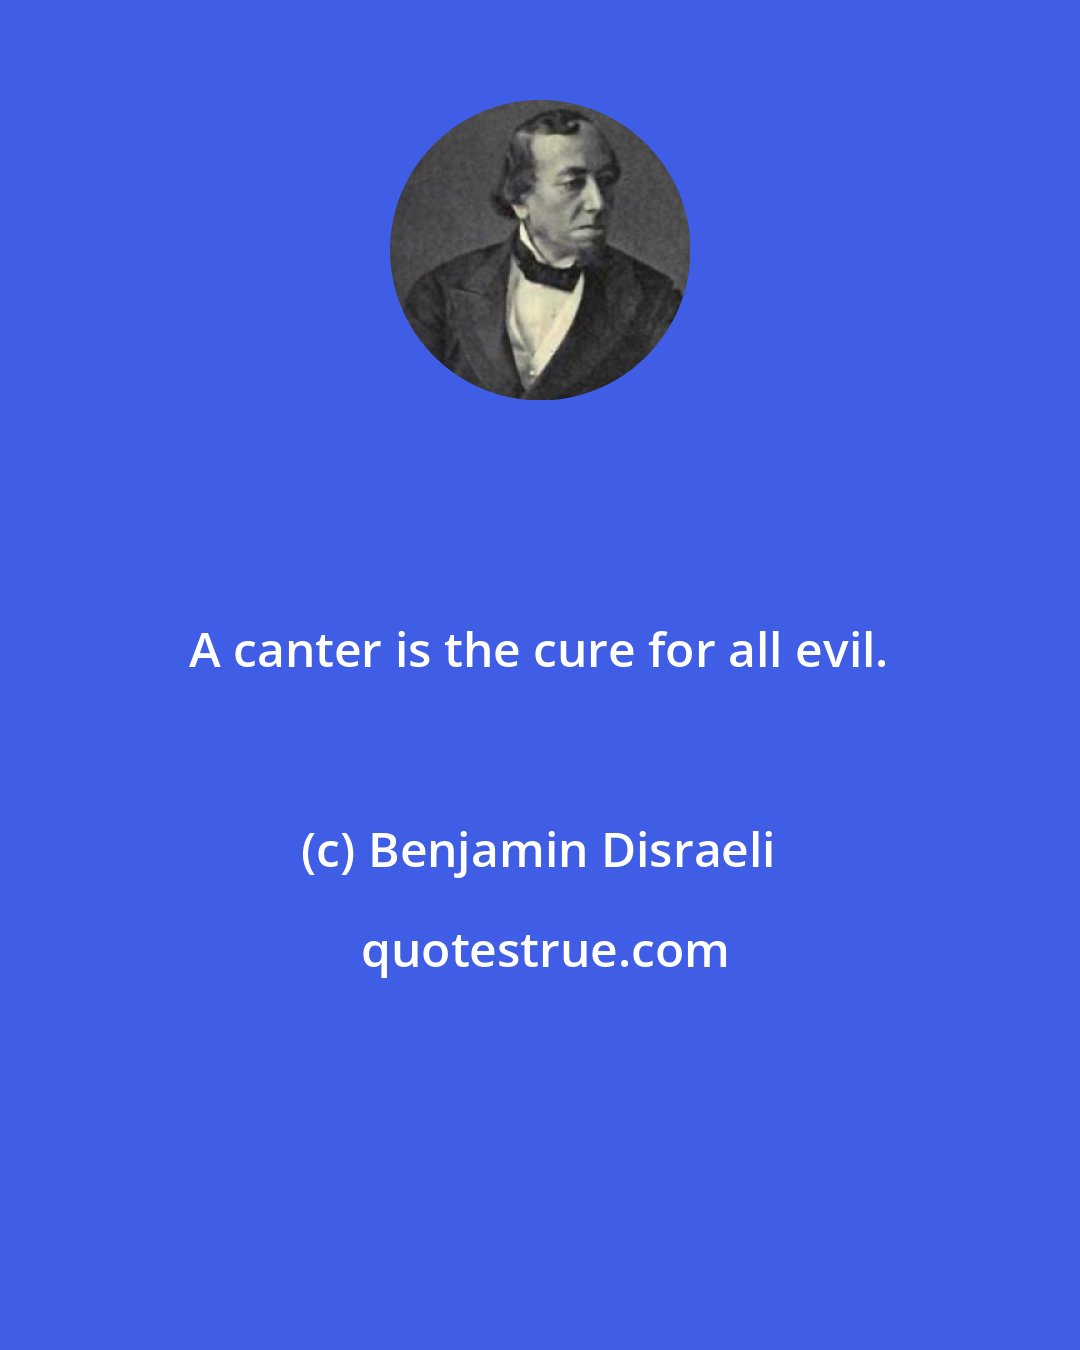 Benjamin Disraeli: A canter is the cure for all evil.